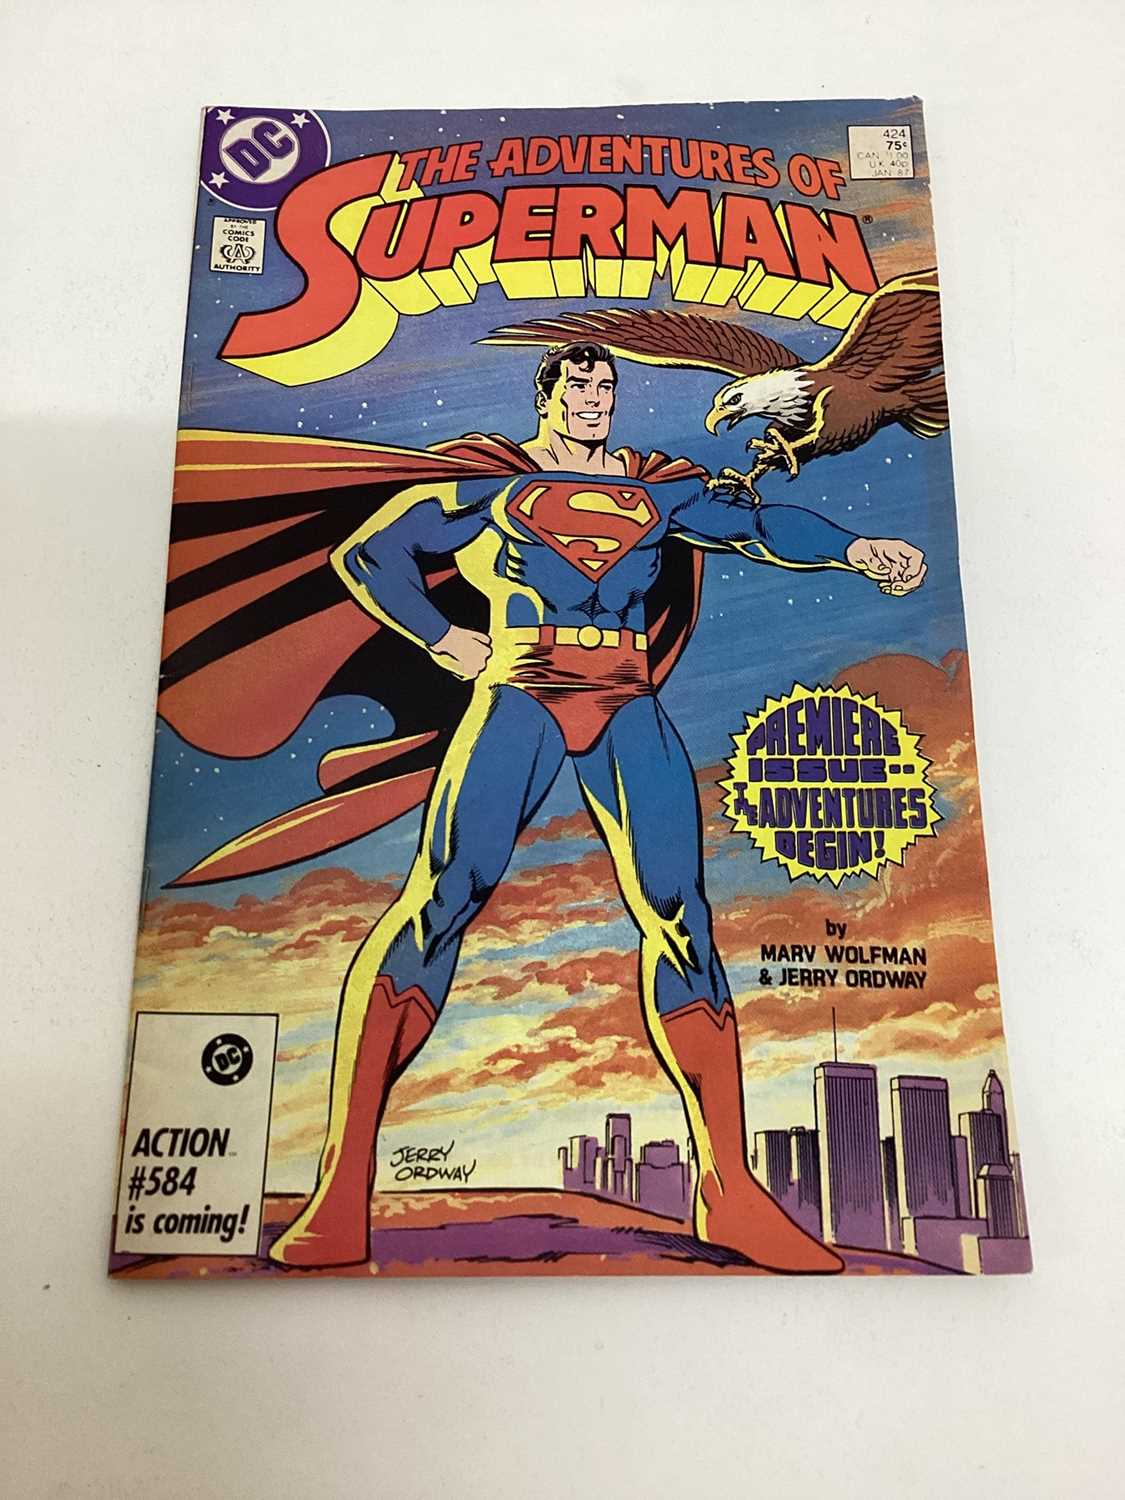 Large quantity of DC Comics, The Adventures of Superman - Image 4 of 9